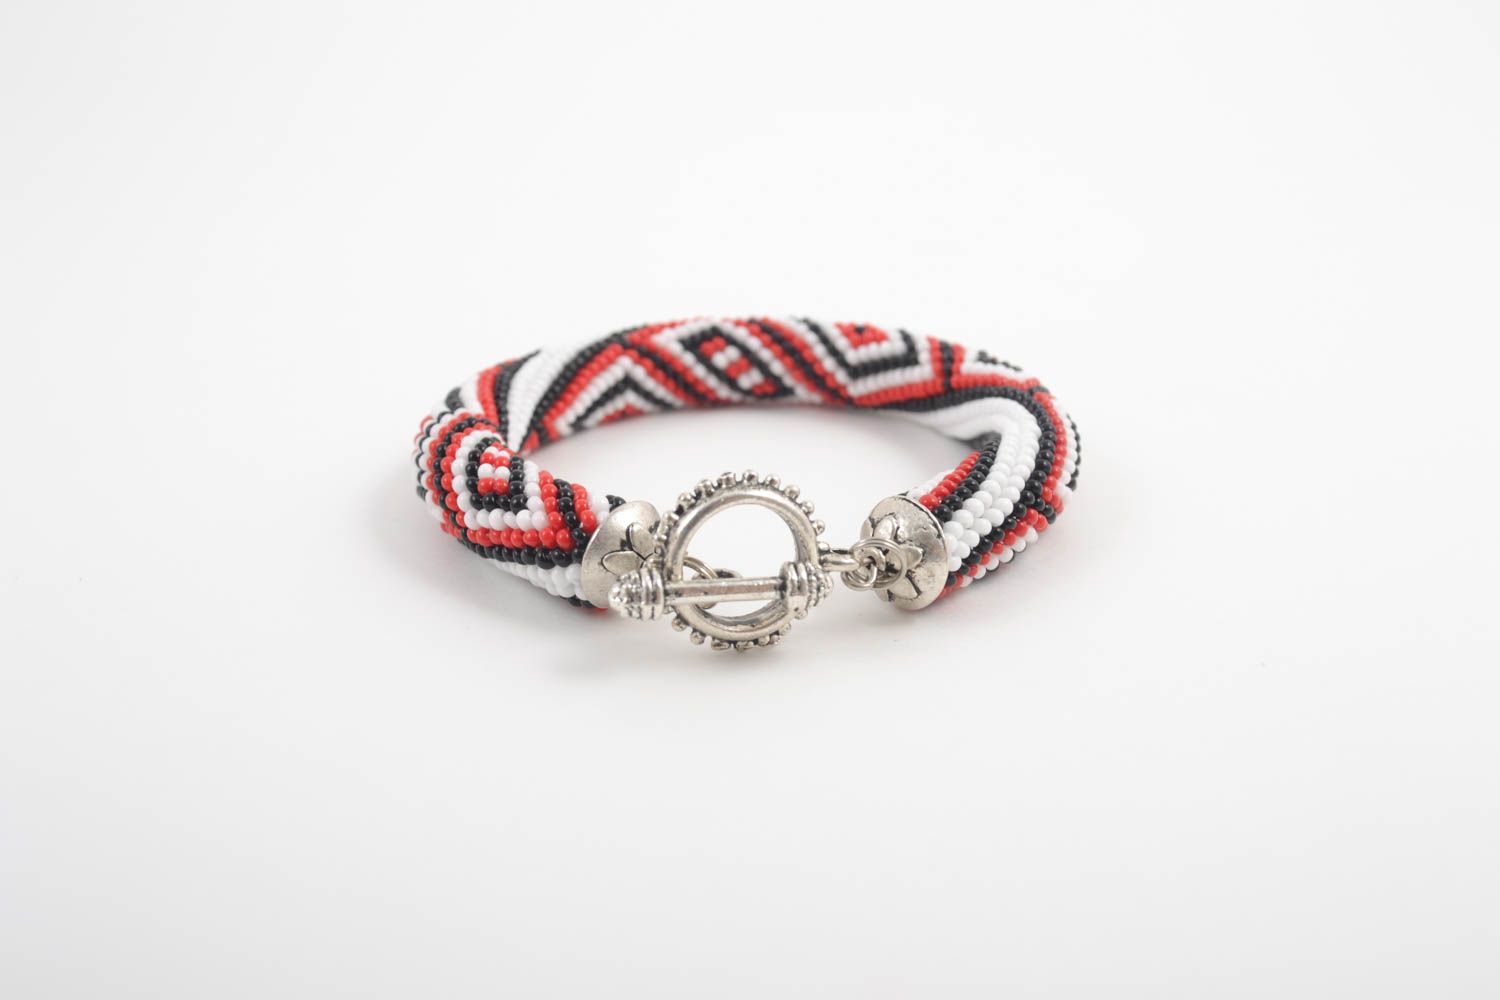 Red, black and white beads elegant cord bracelet with silver fittings photo 2